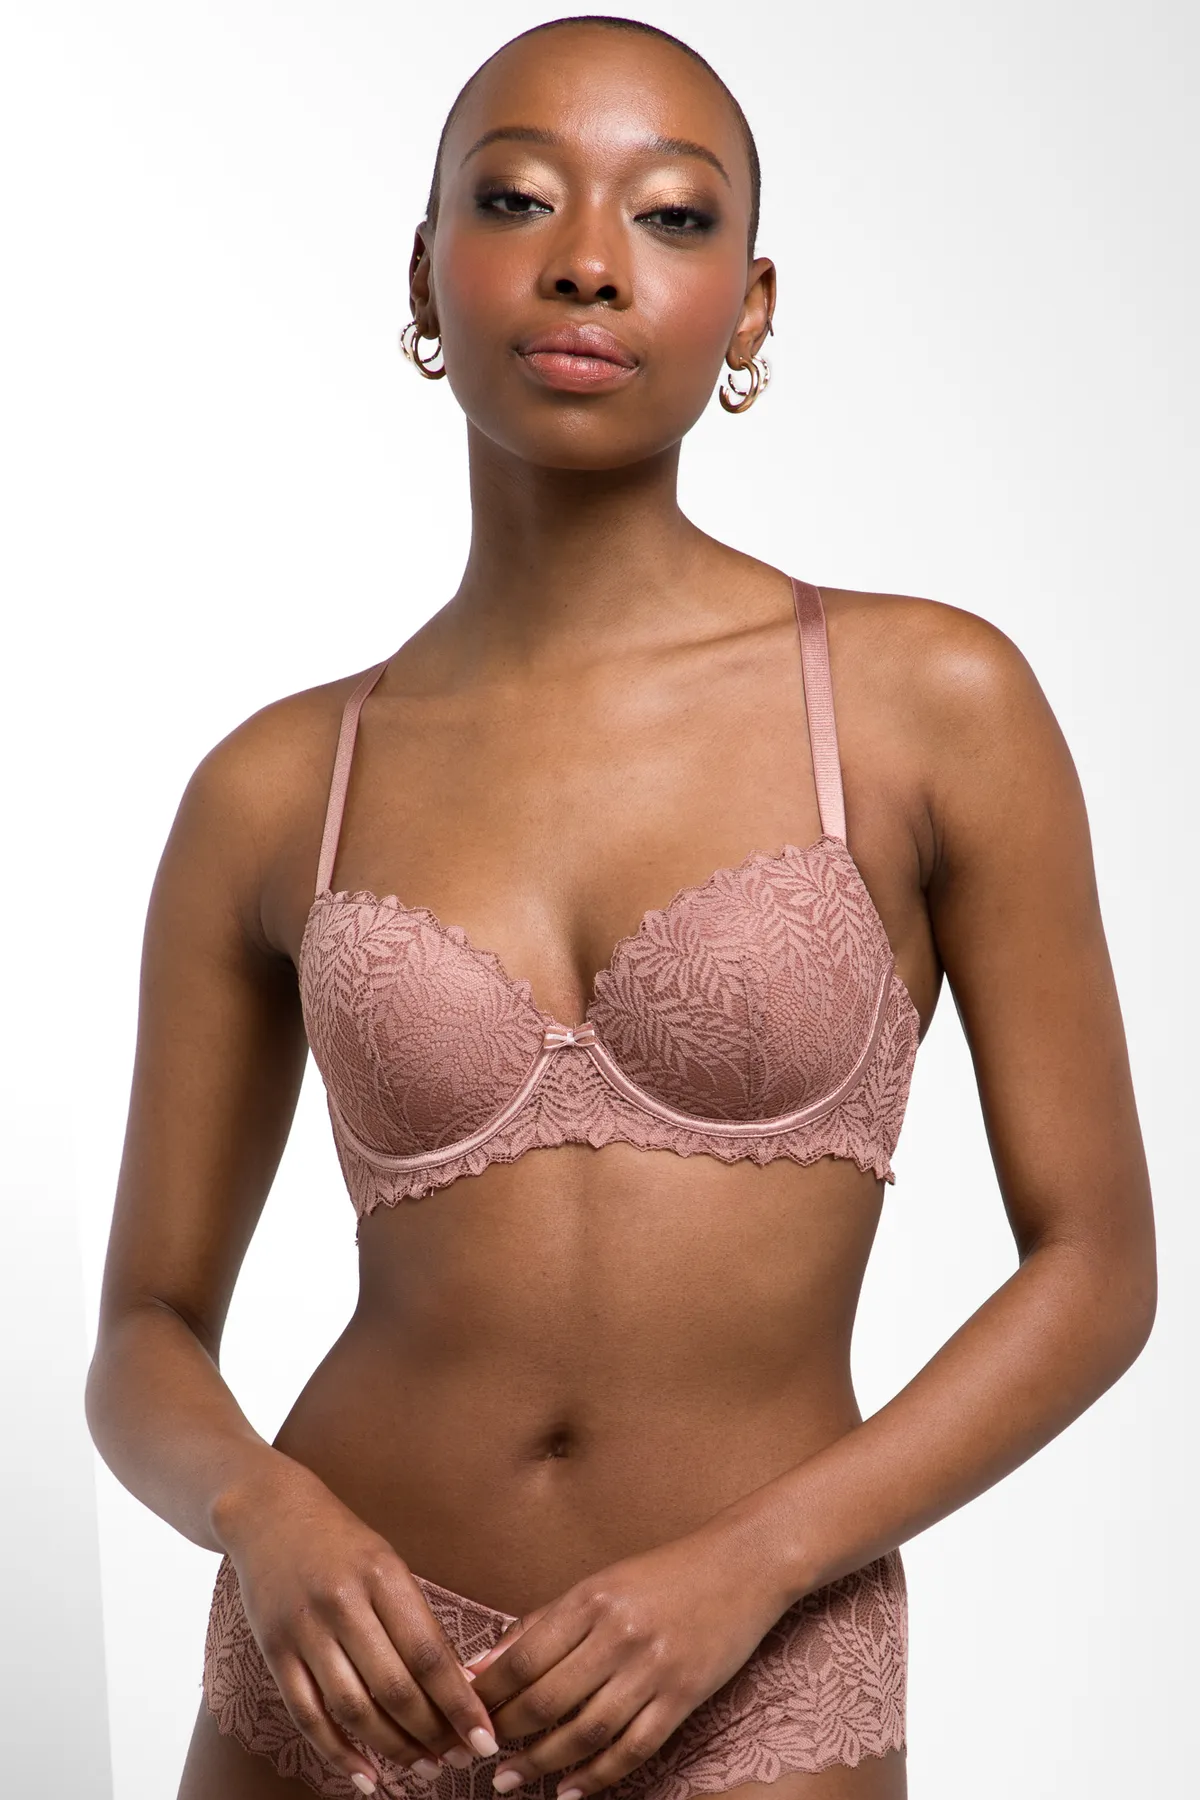 All Lace Wire Bra Pink